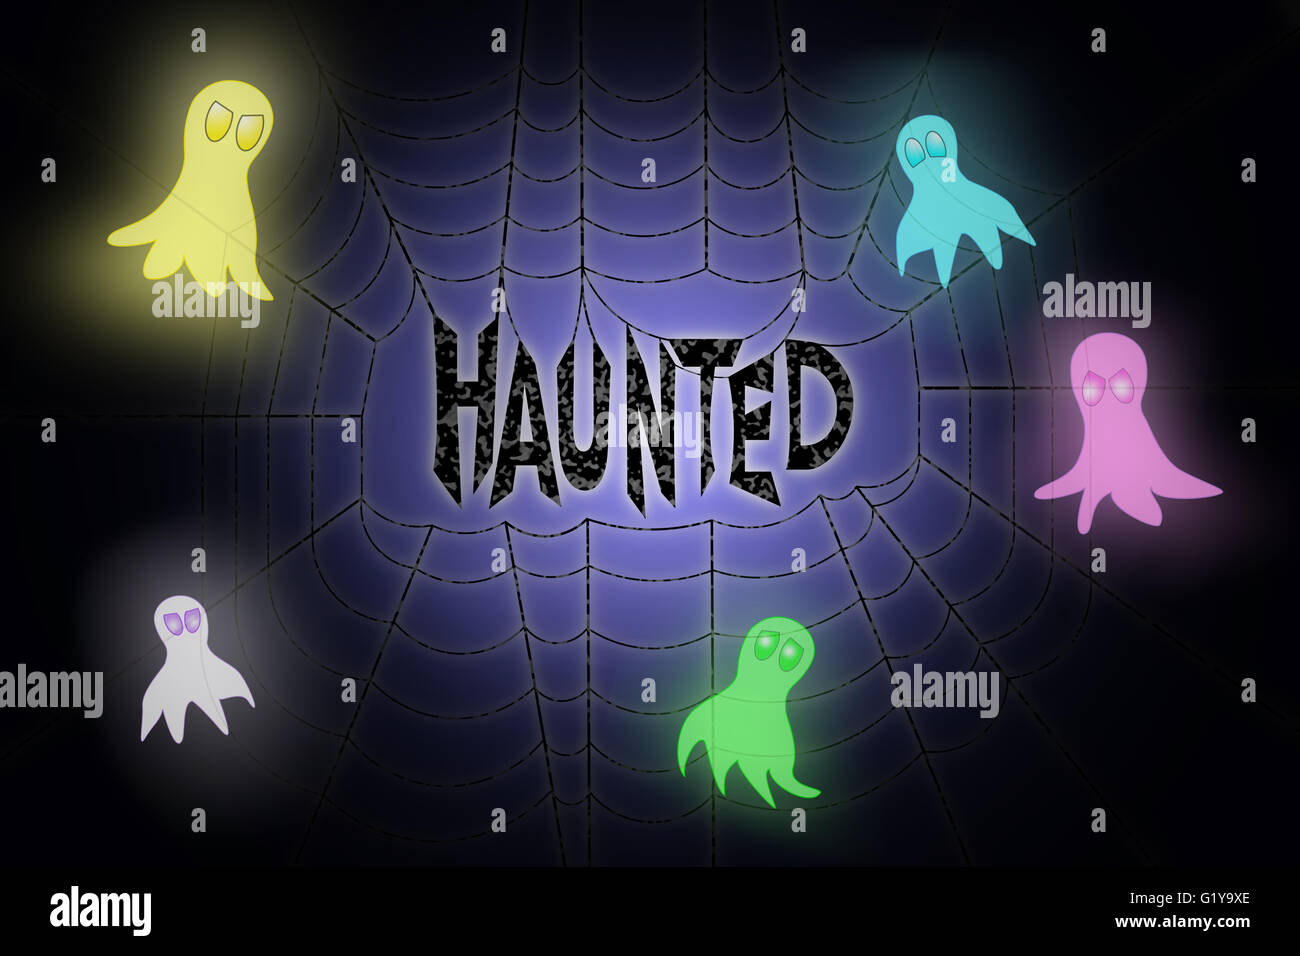 Spider web with glowing word haunted hanging in the middle, with neon colored glowing ghosts flying around it Stock Photo